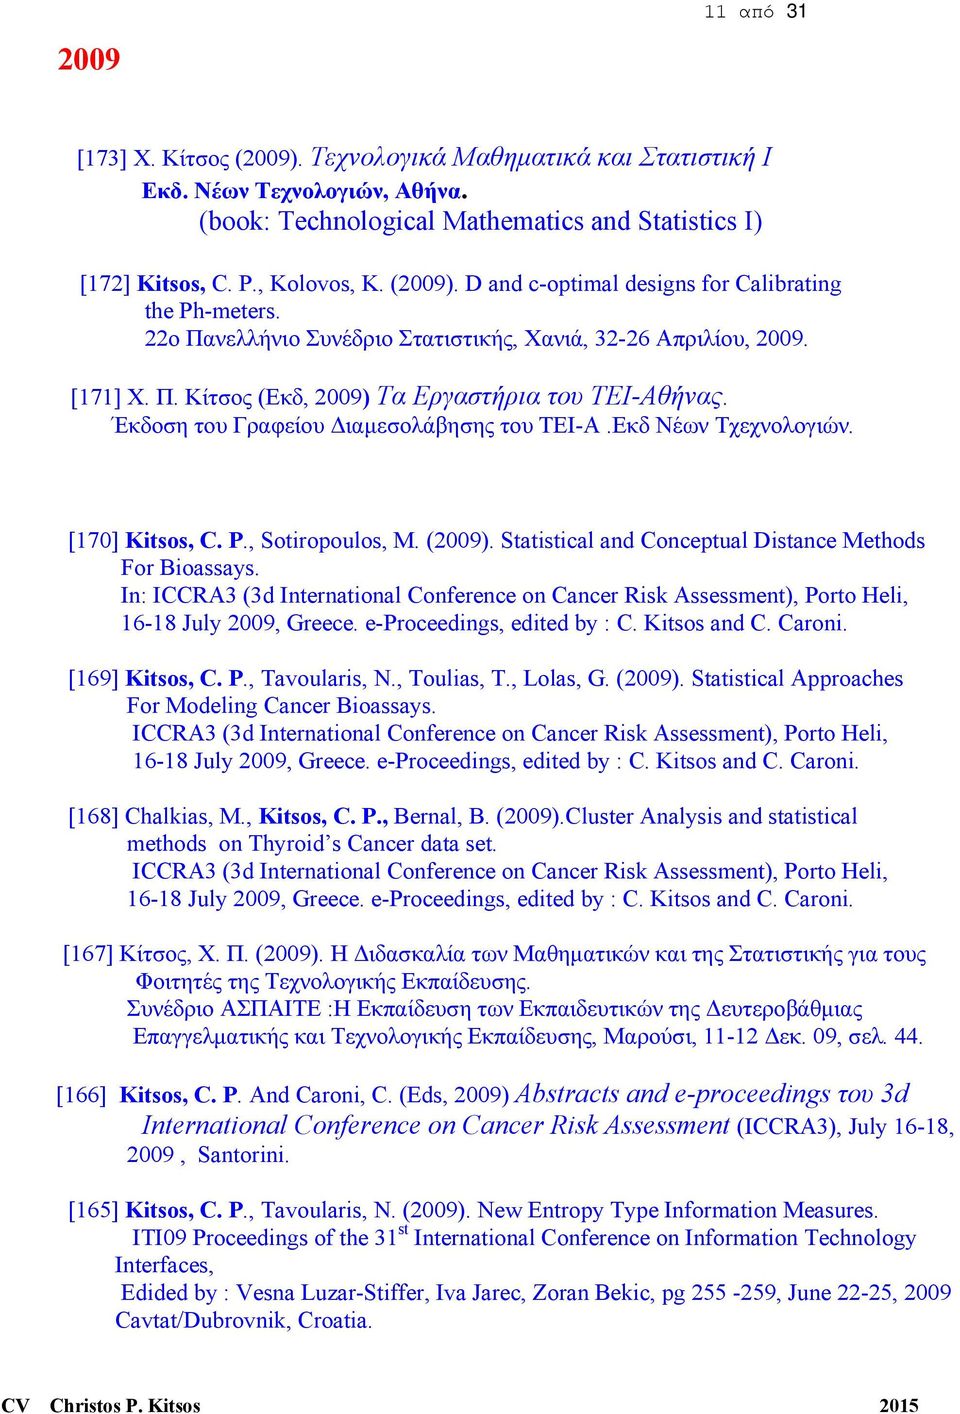 [170] Kitsos, C. P., Sotiropoulos, M. (2009). Statistical and Conceptual Distance Methods For Bioassays.